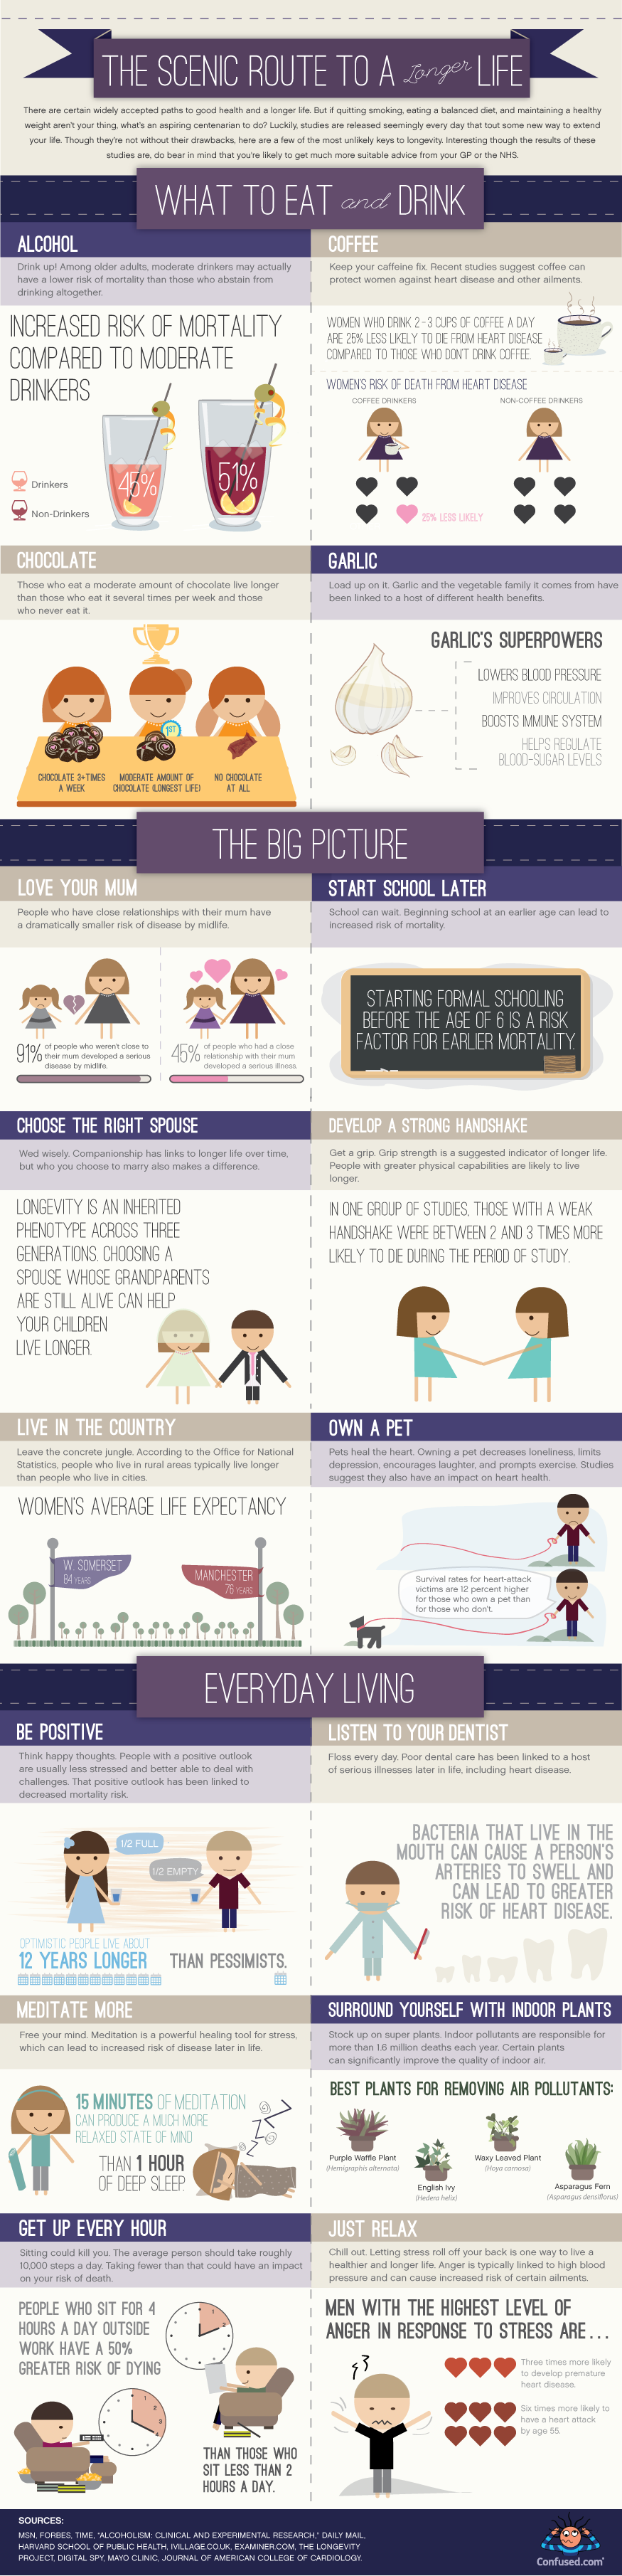 longevity tips for office workers